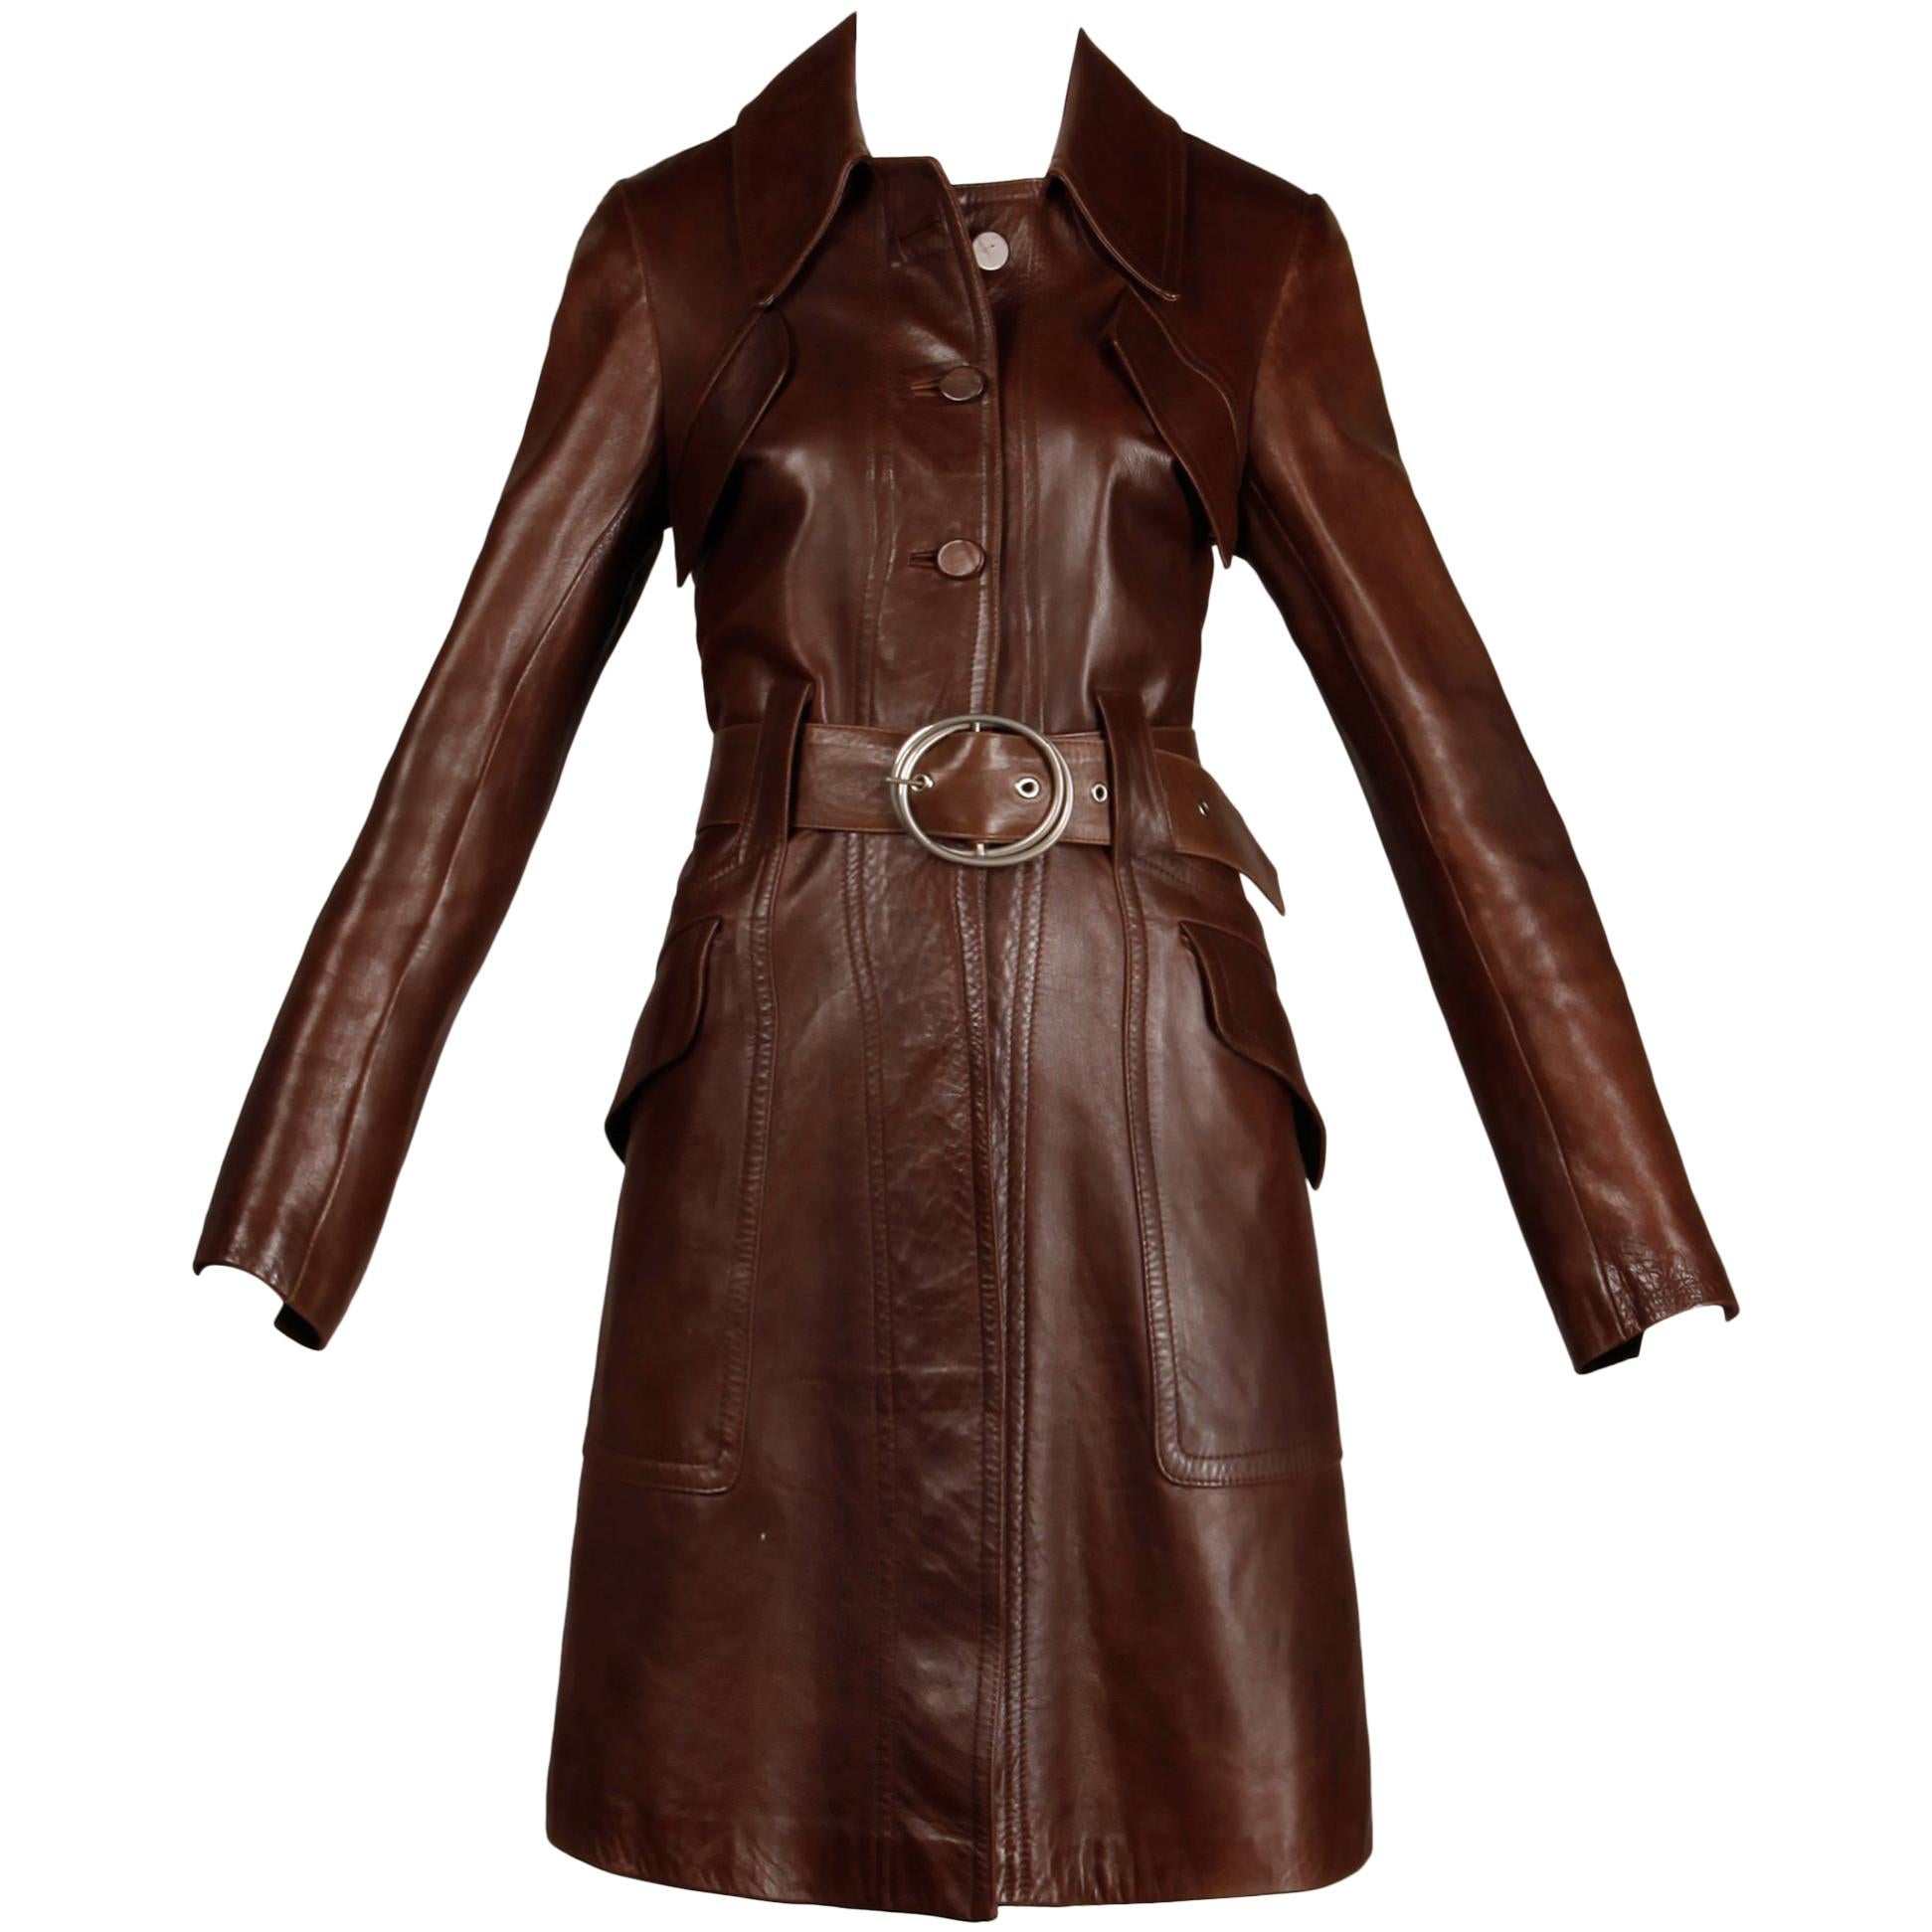 1970s Vintage Soft Buttery Brown Leather Trench Coat with Belt